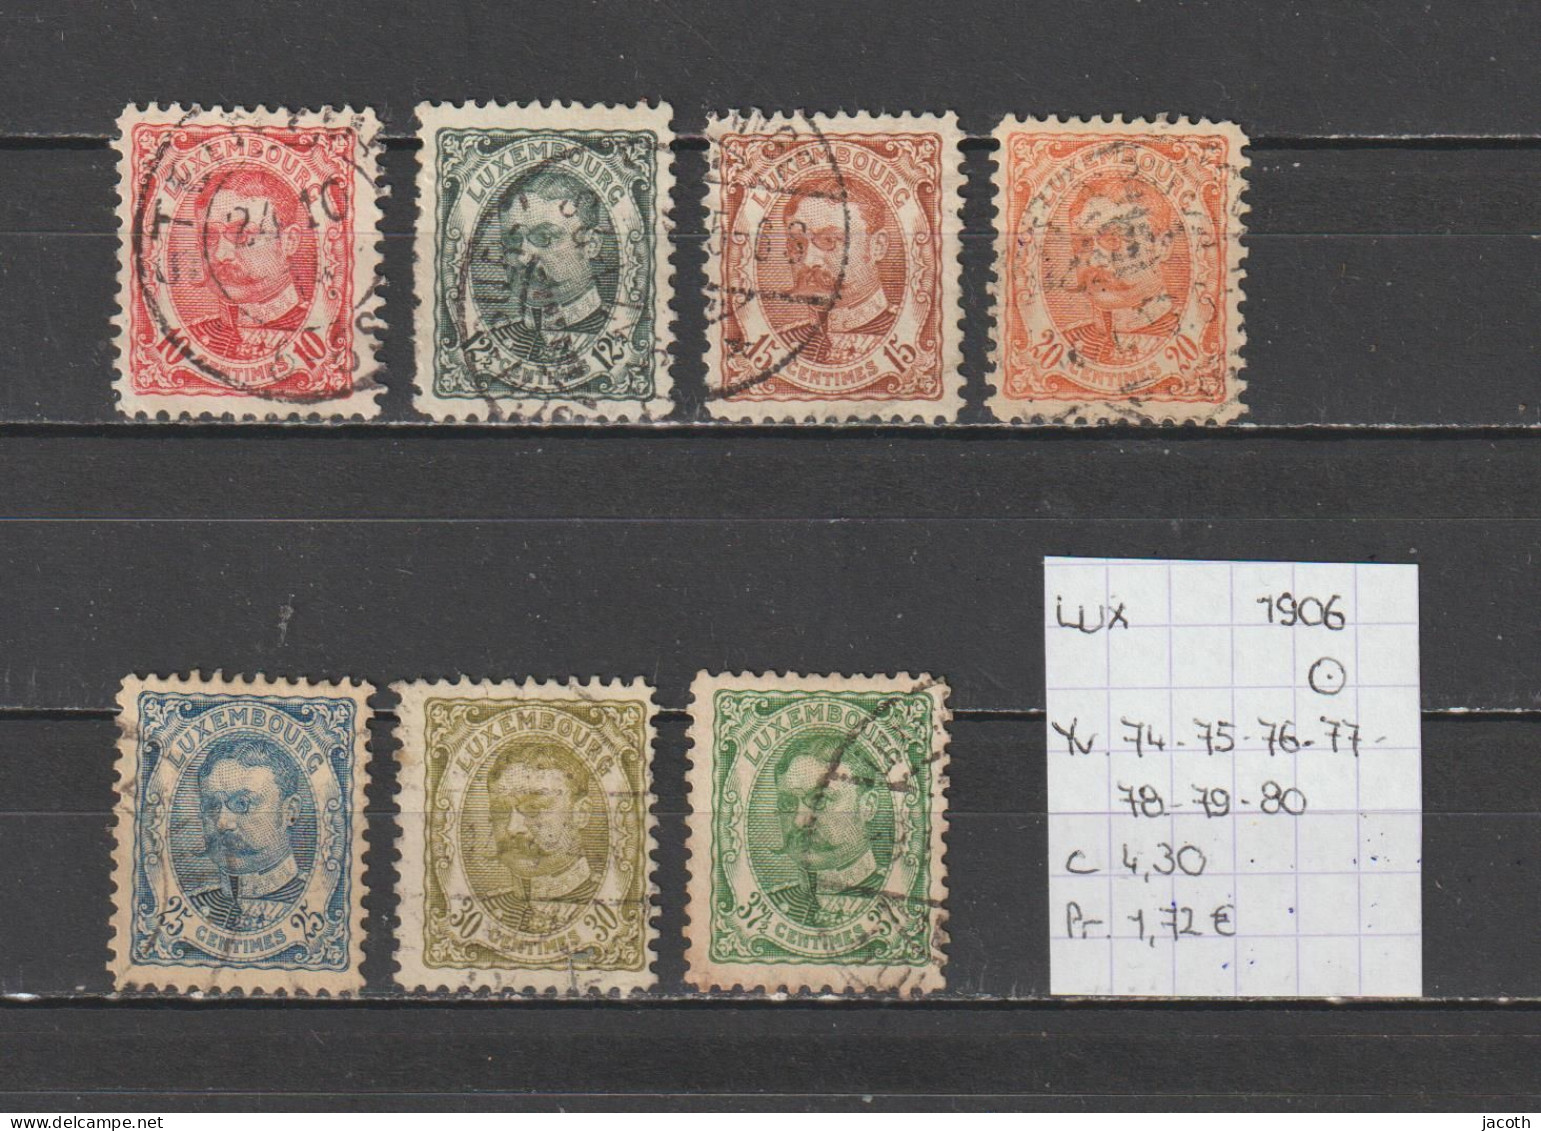 (TJ) Luxembourg 1906 - YT 74 + 75 + 76 + 77 + 78 + 79 + 80 (gest./obl./used) - 1906 Willem IV